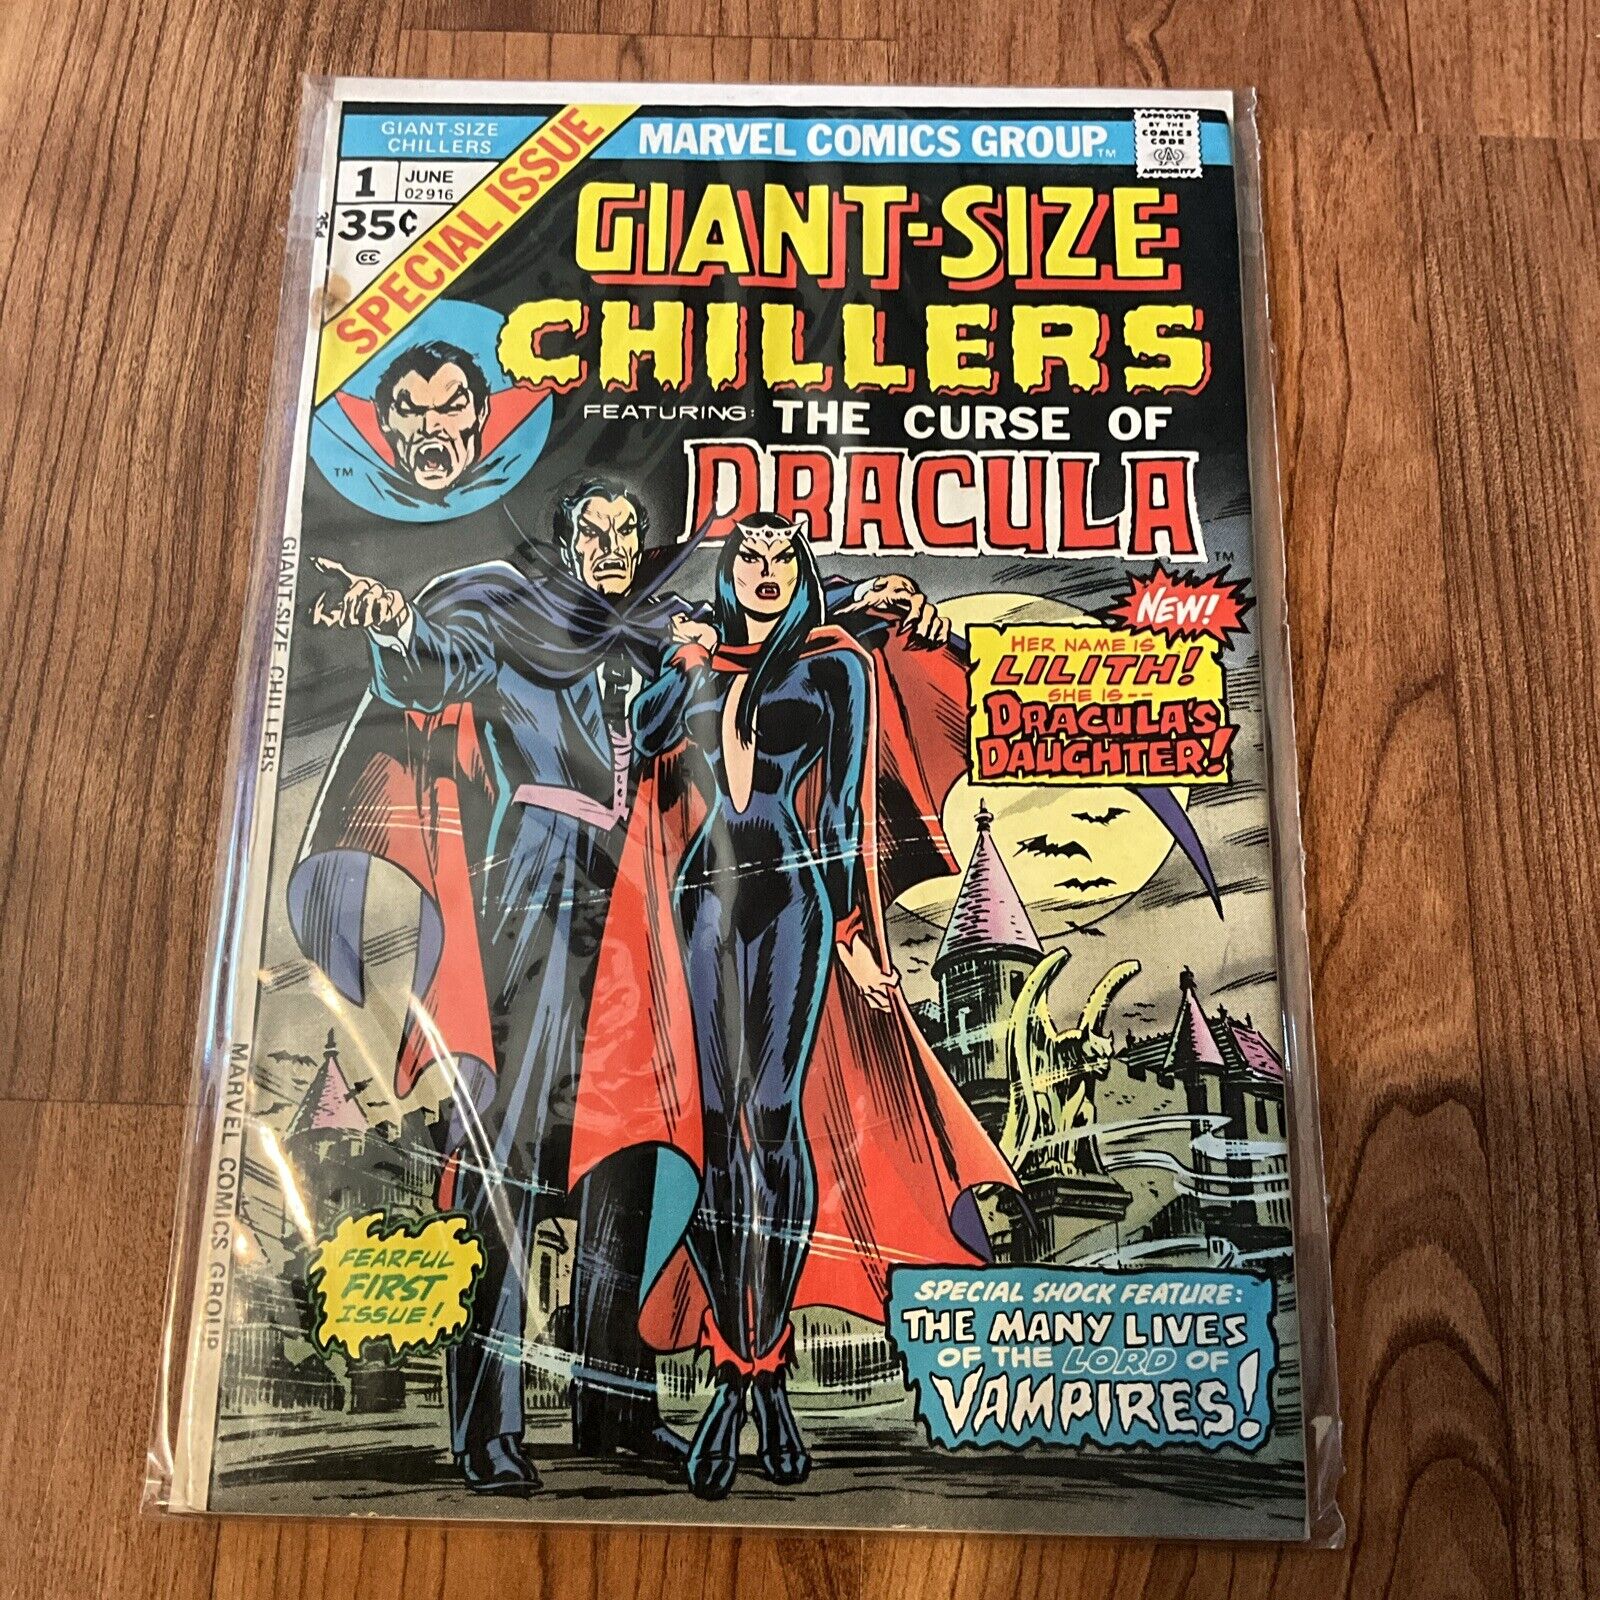 Marvel Comics GIANT SIZE CHILLERS #1 FIRST APPEARANCE OF LILITH 1974 DRACULA